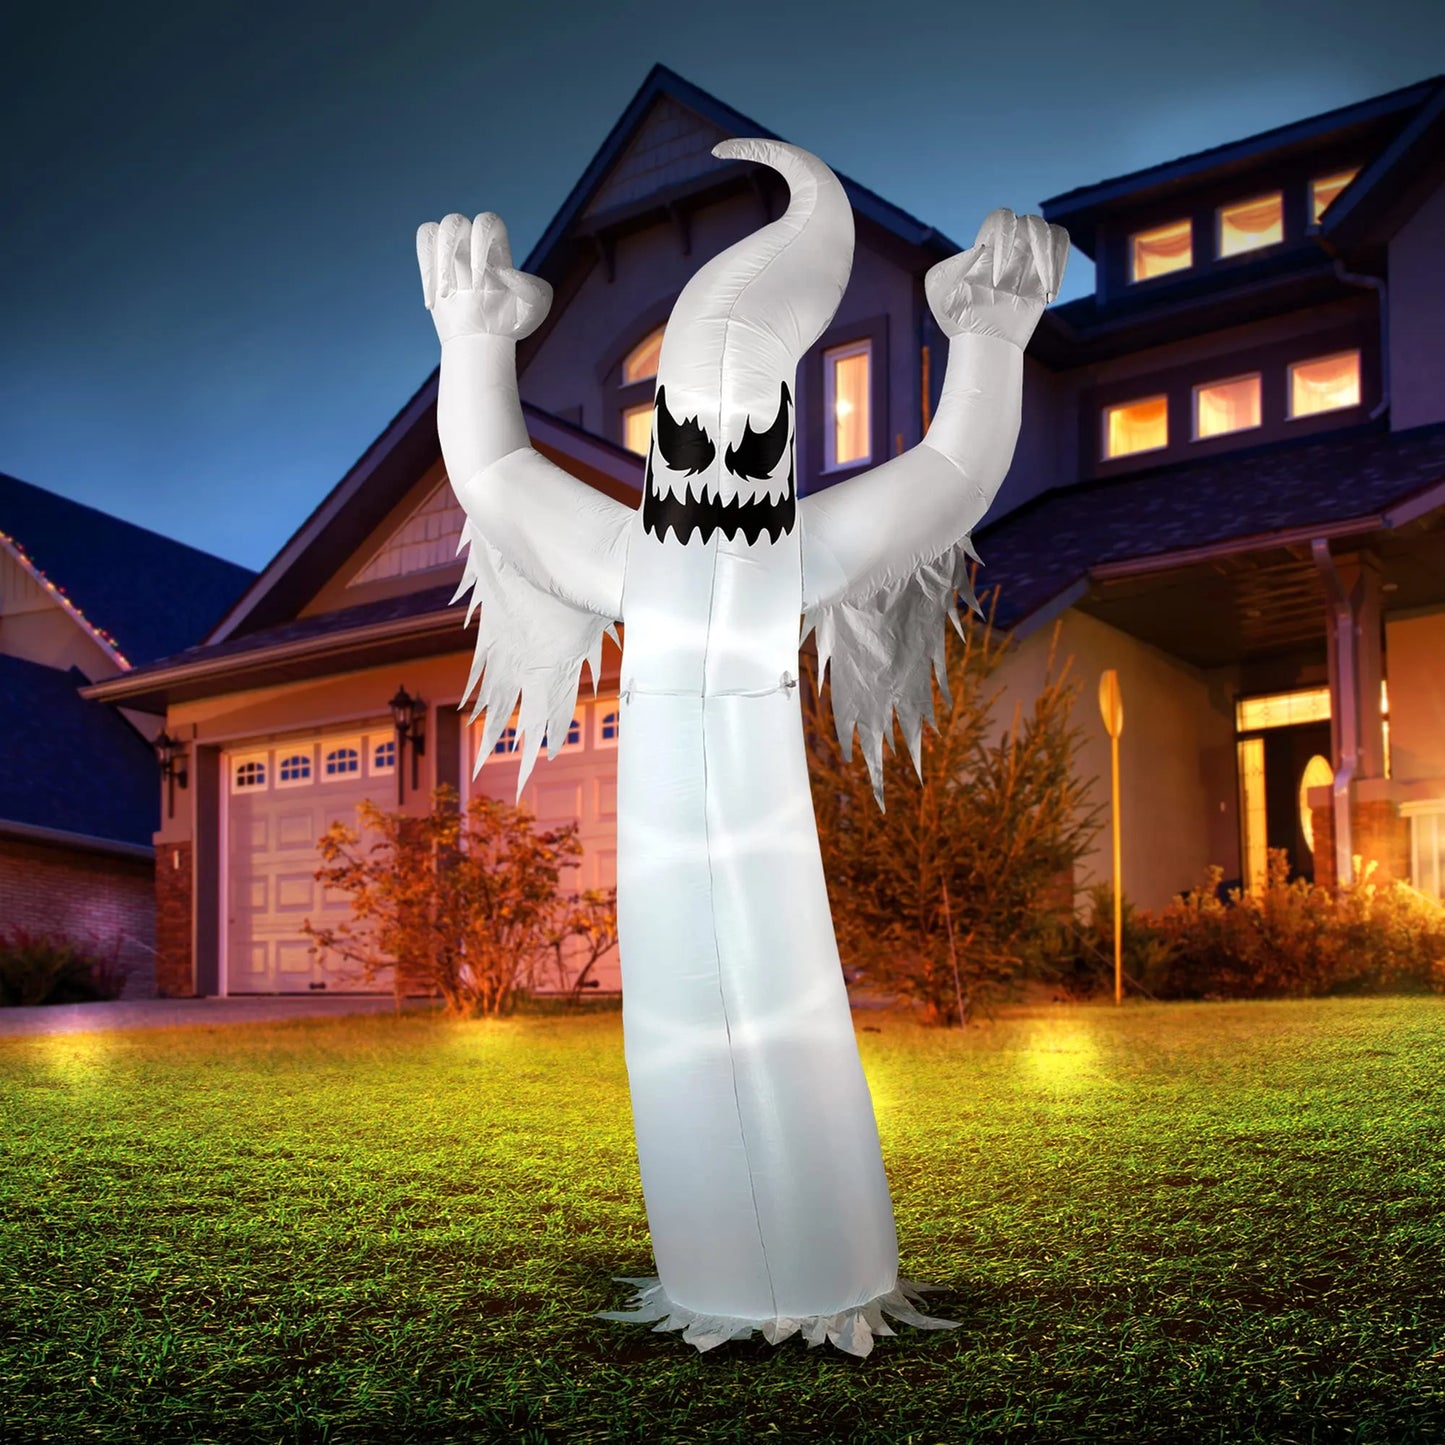 12 Feet Halloween Inflatable Scary Spooky Ghost